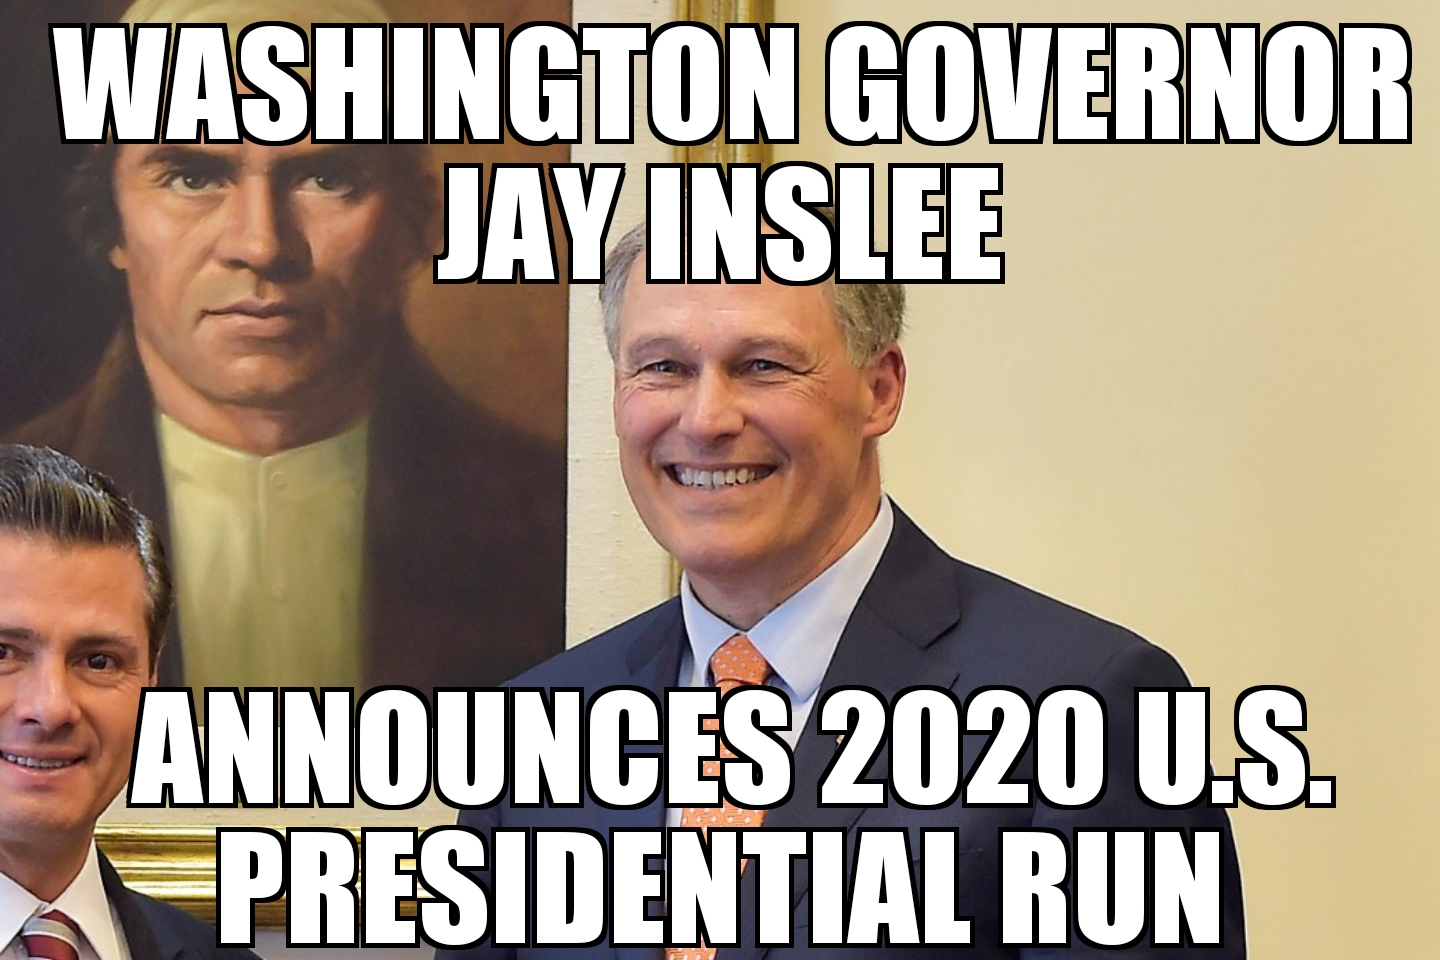 Jay Inslee joins 2020 race